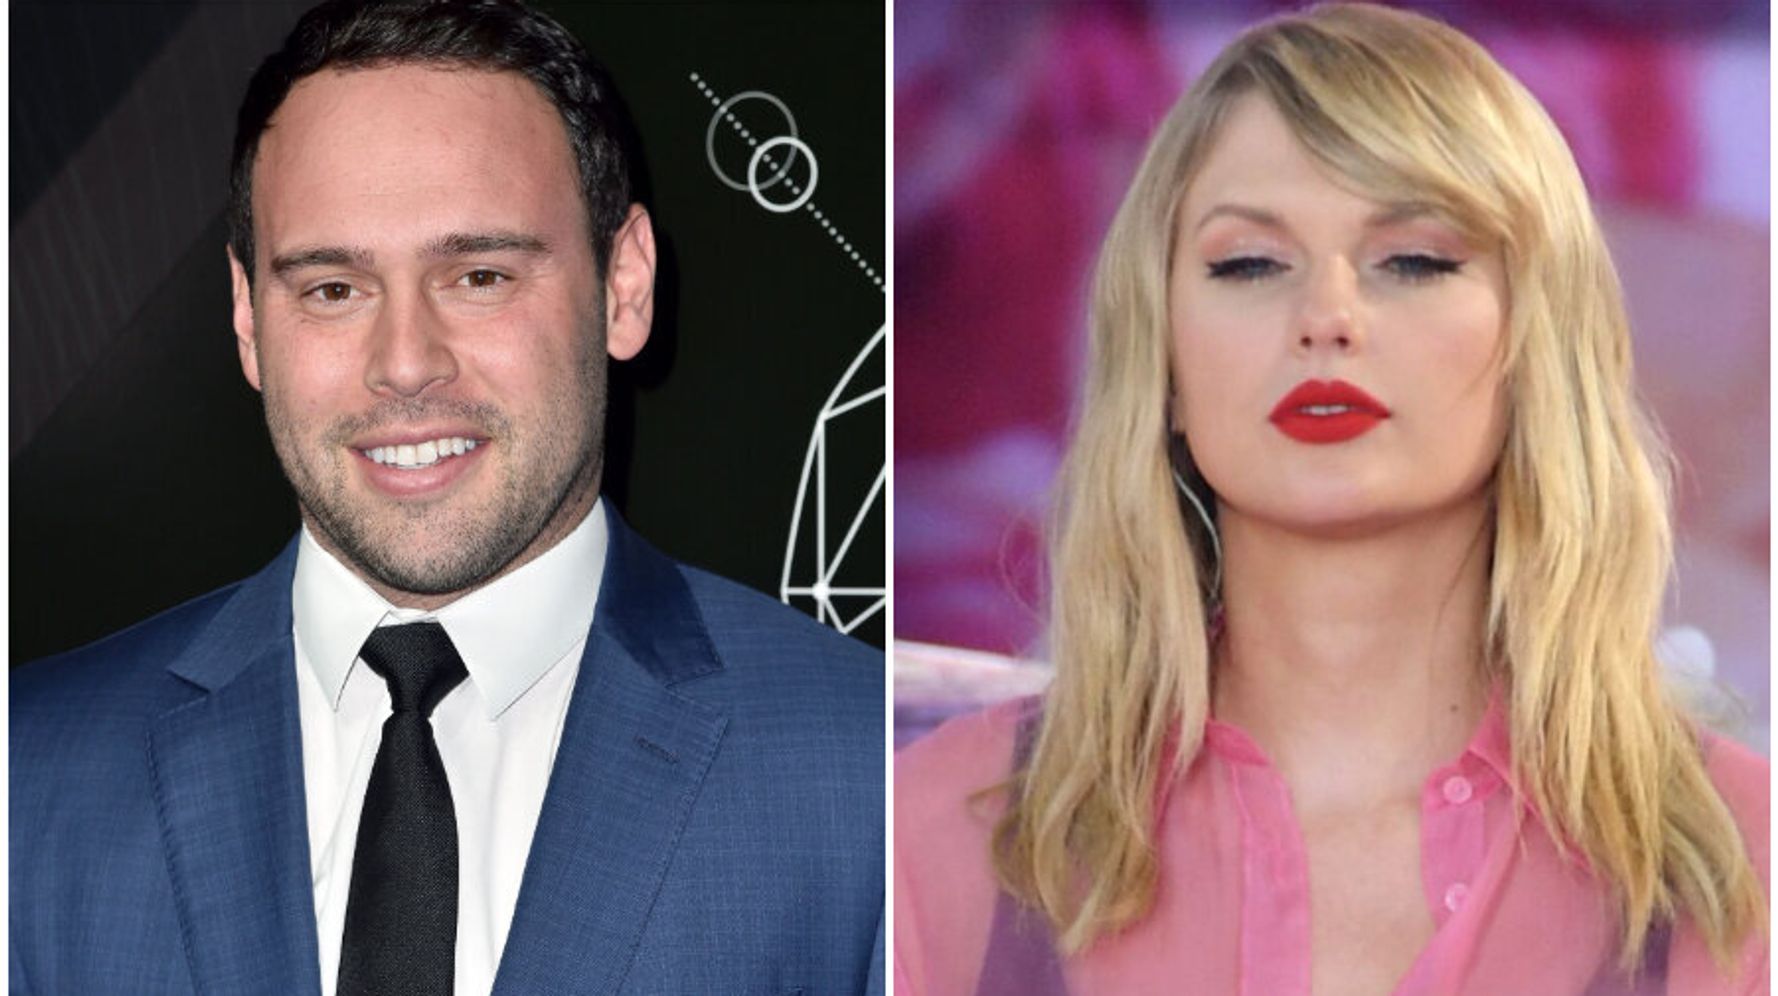 Taylor Swift’s Lover Album Gets Thumbs Up From Nemesis Scooter Braun ...